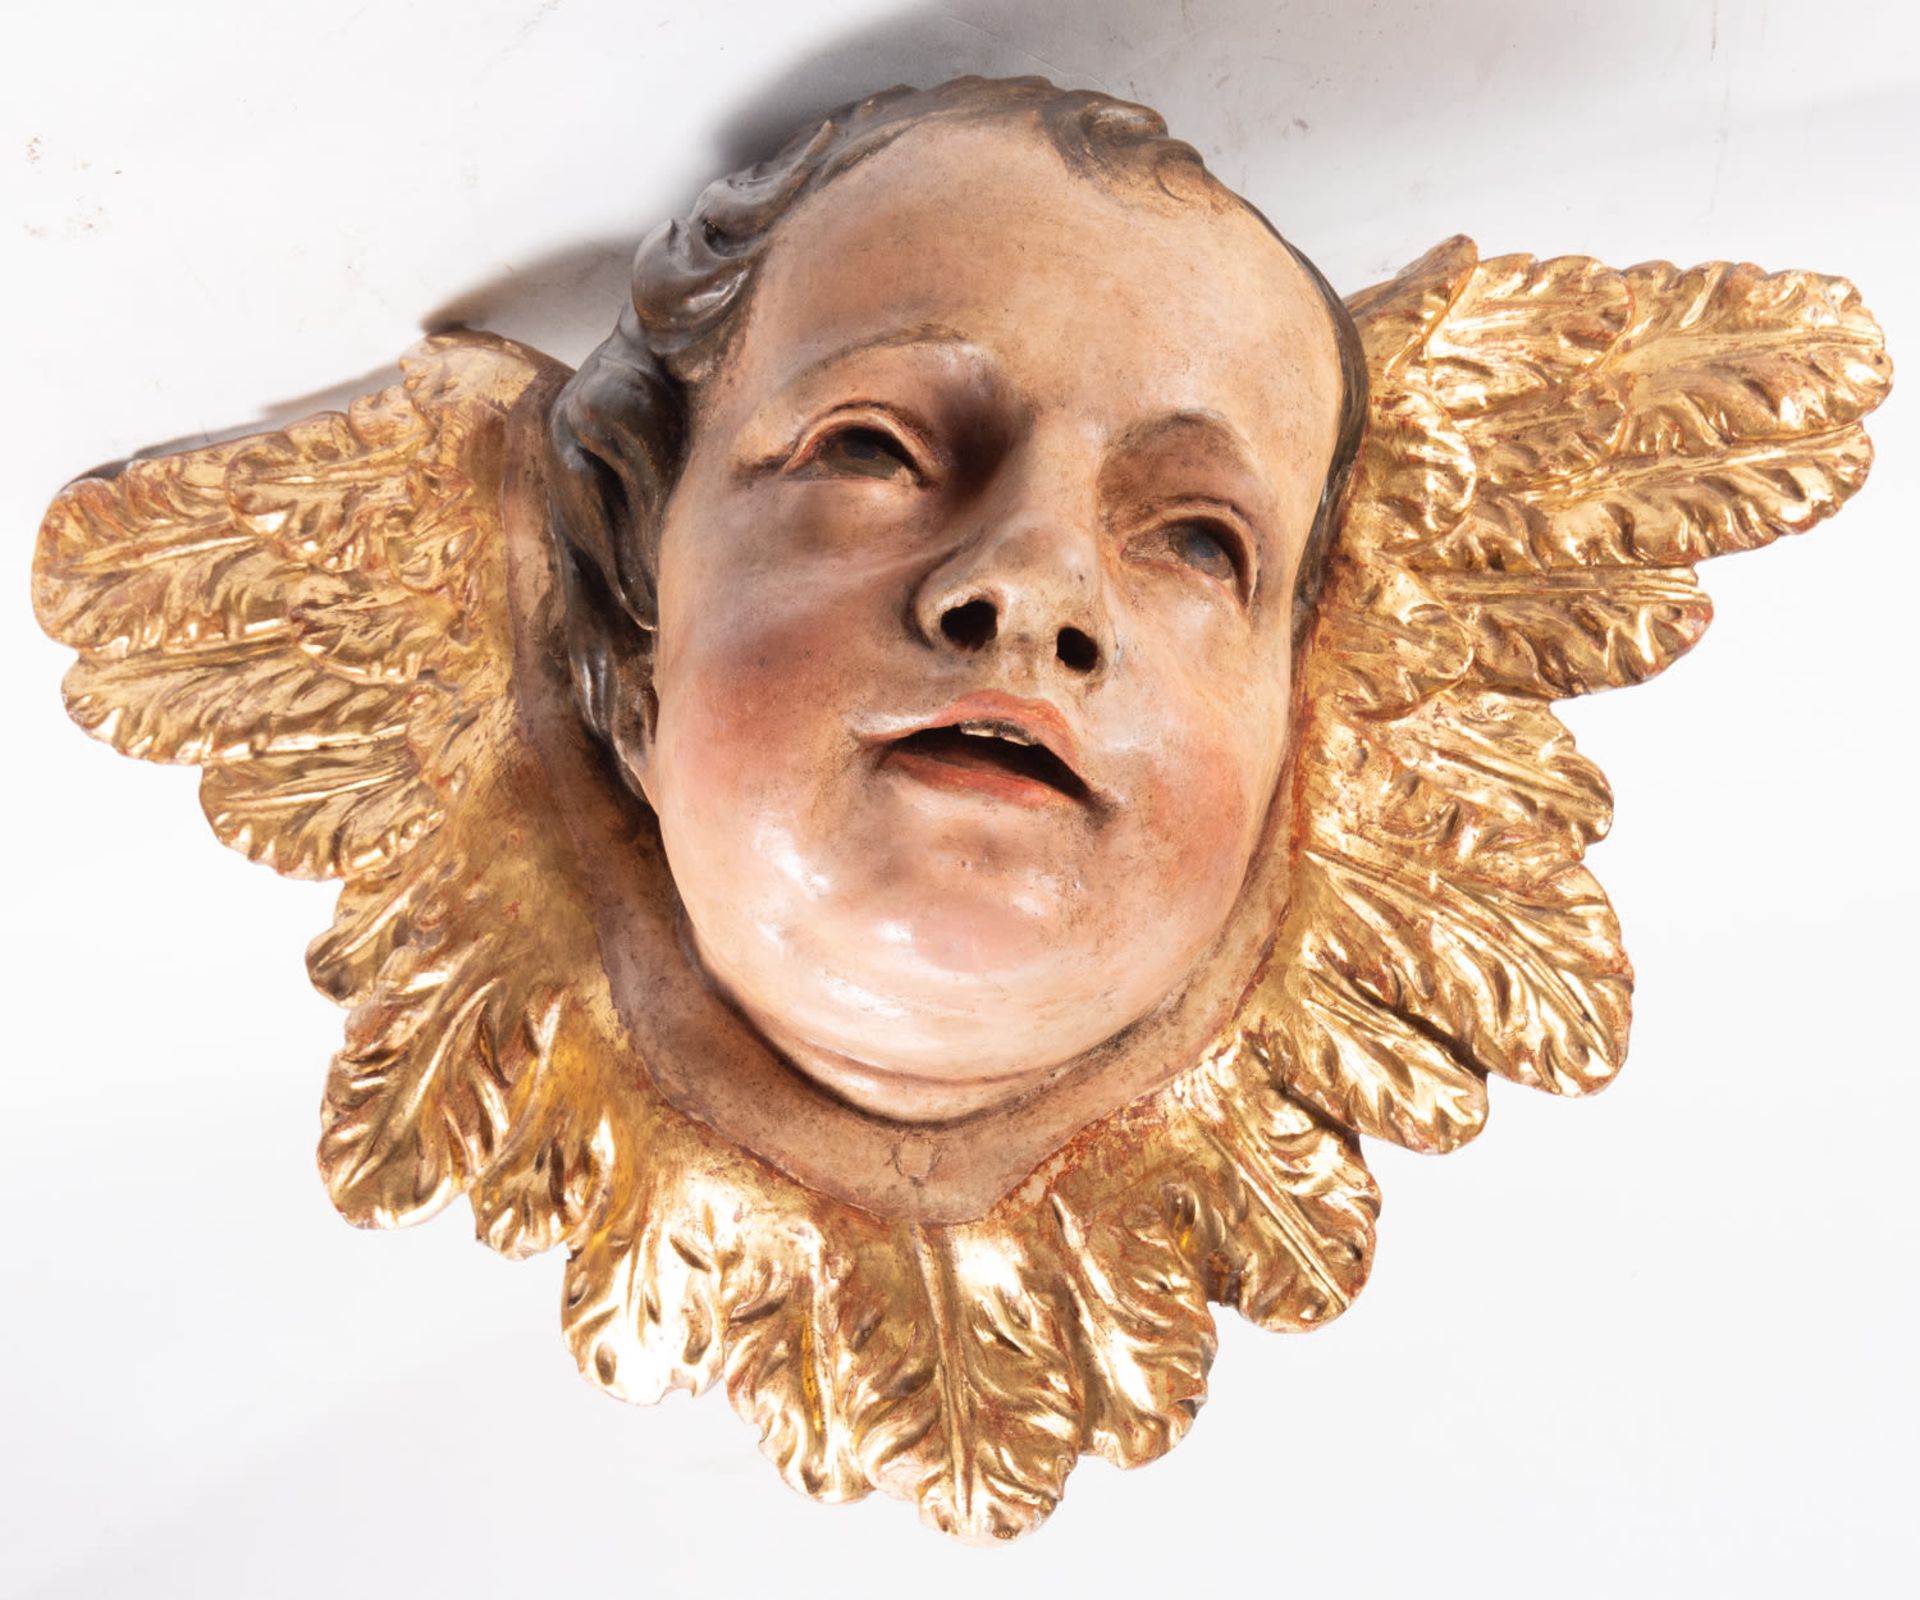 Exceptional Pair of Wall Cherubs Heads, Granada school from the 17th century - Image 3 of 6